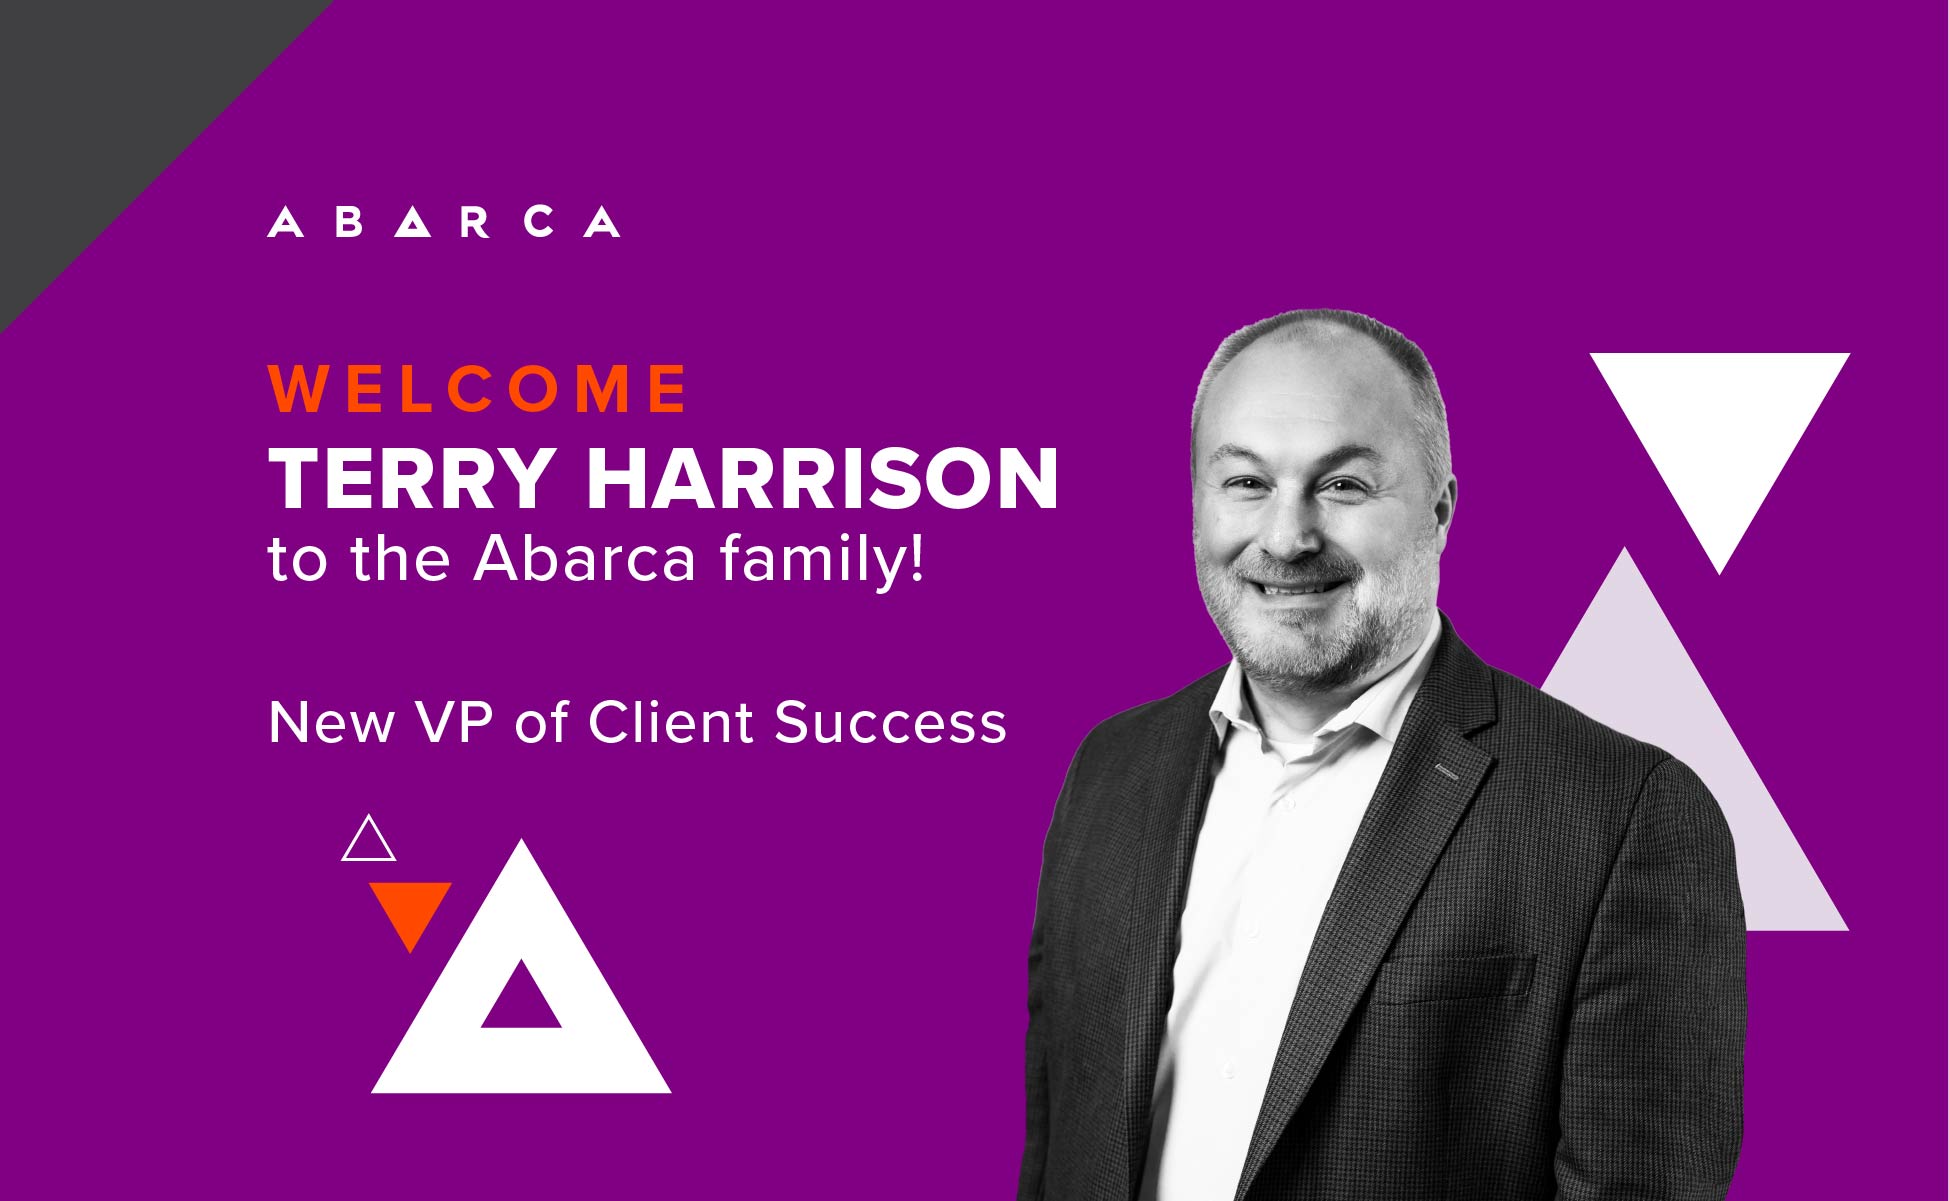 Abarca Health welcomes Terry Harrison as the new Vice President of Client Success